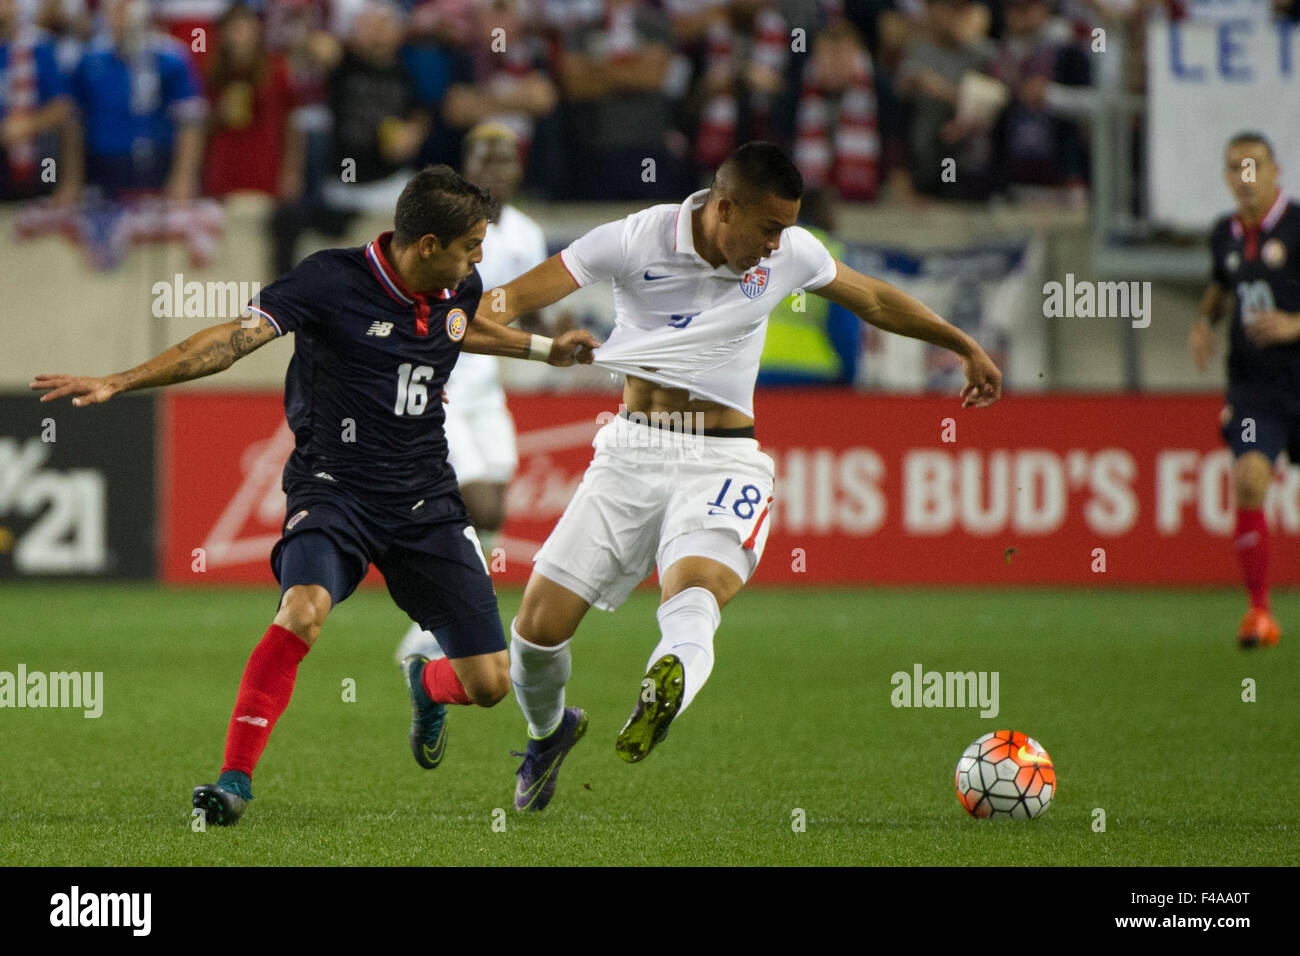 October 13, 2015: Costa Rica defender Christian Gamboa (16) grabs and pulls on USA forward Bobby Wood (18) as they battle for the ball during The USA Men's National Team vs. Costa Rica Men's National Team- international friendly at Red Bull Arena - Harrison, NJ. Costa Rica defeated The US Men's National Team 1-0. Mandatory Credit: Kostas Lymperopoulos/Cal Sport Media Stock Photo